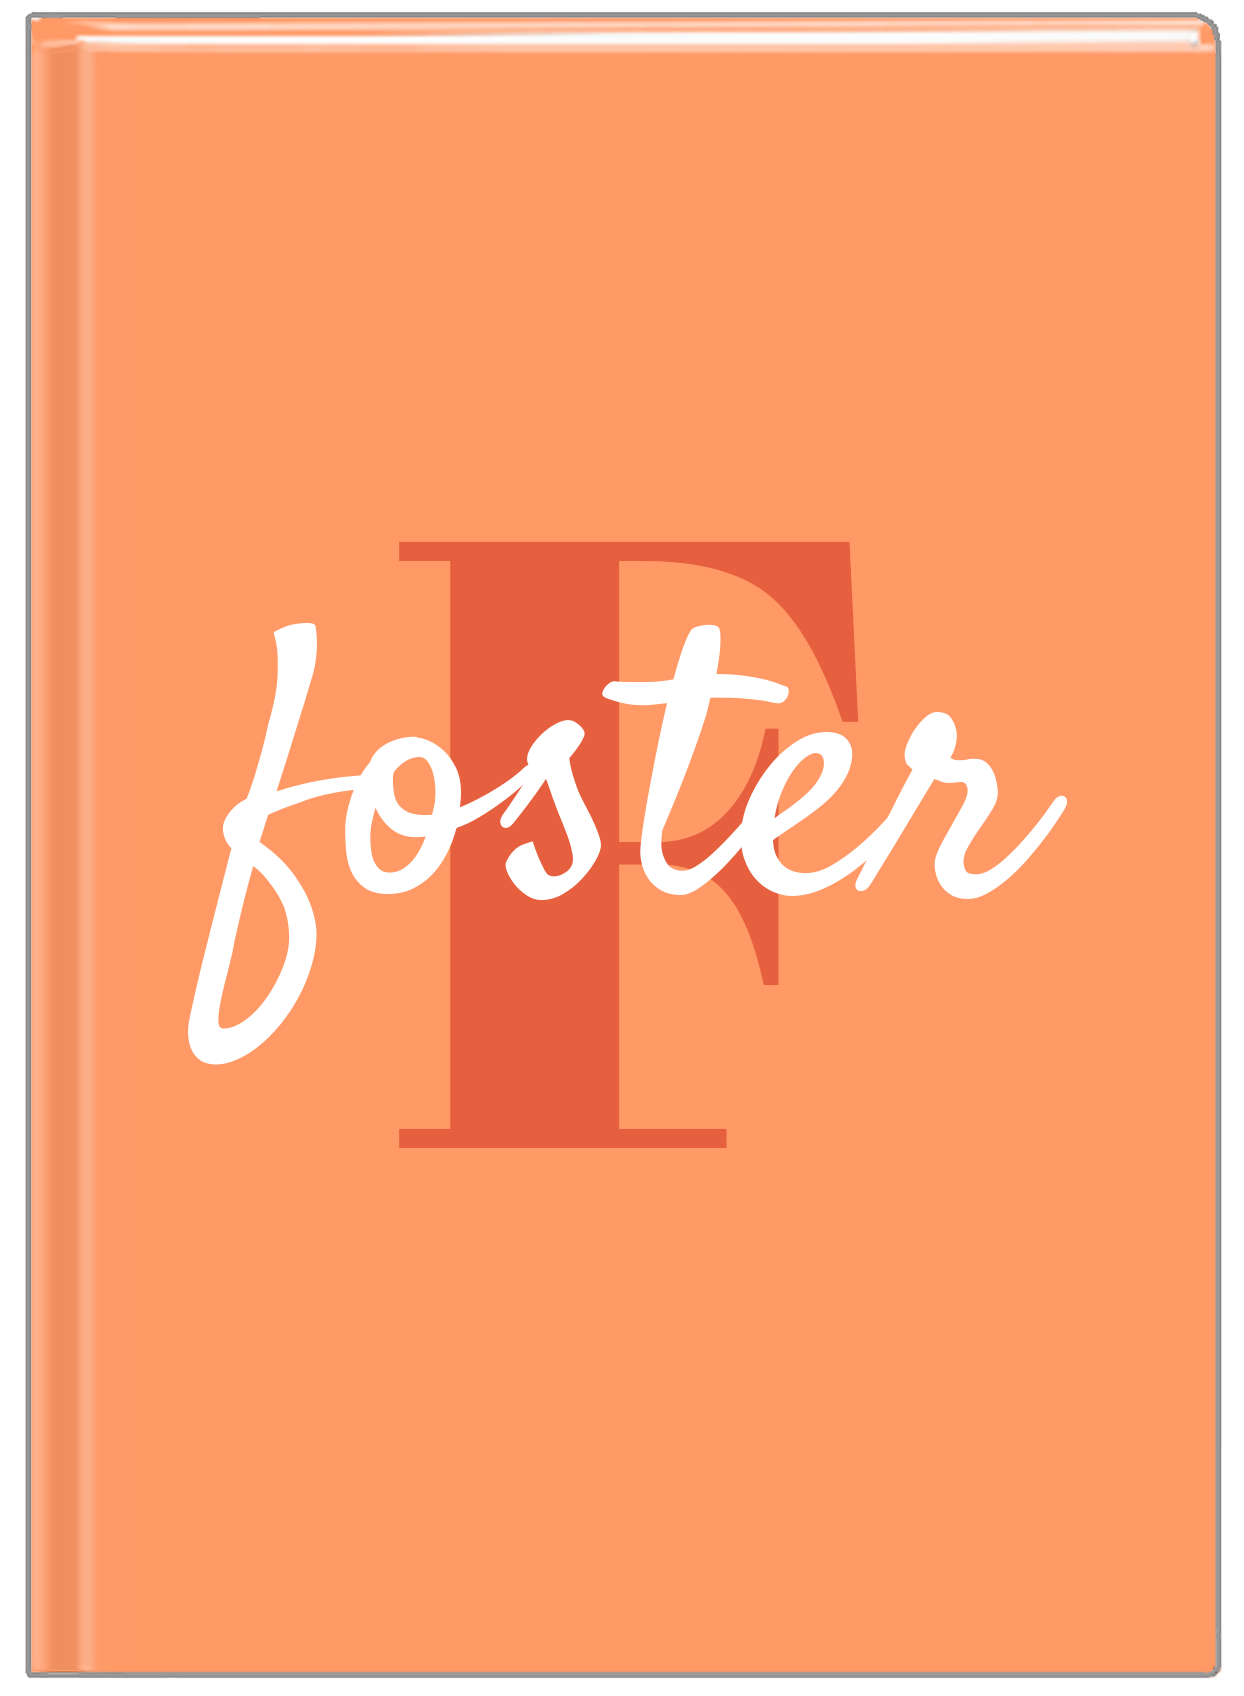 Personalized Solid Color Journal - Orange Background - Name Over Initial - Front View